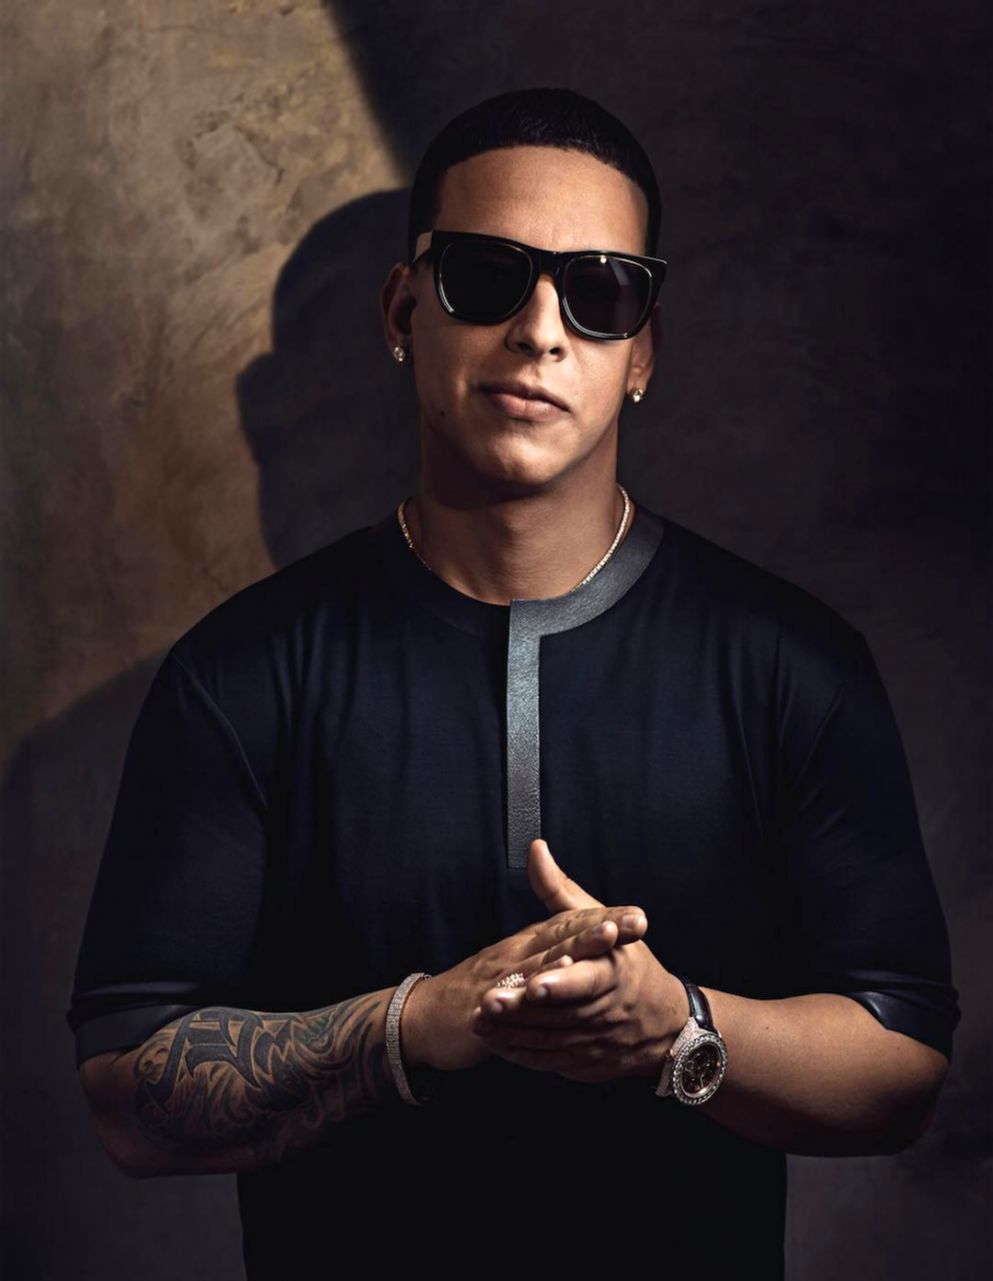 Hot 971 Svg » 10 Years On Top » Daddy Yankee Is Raising - Daddy Yankee - HD Wallpaper 